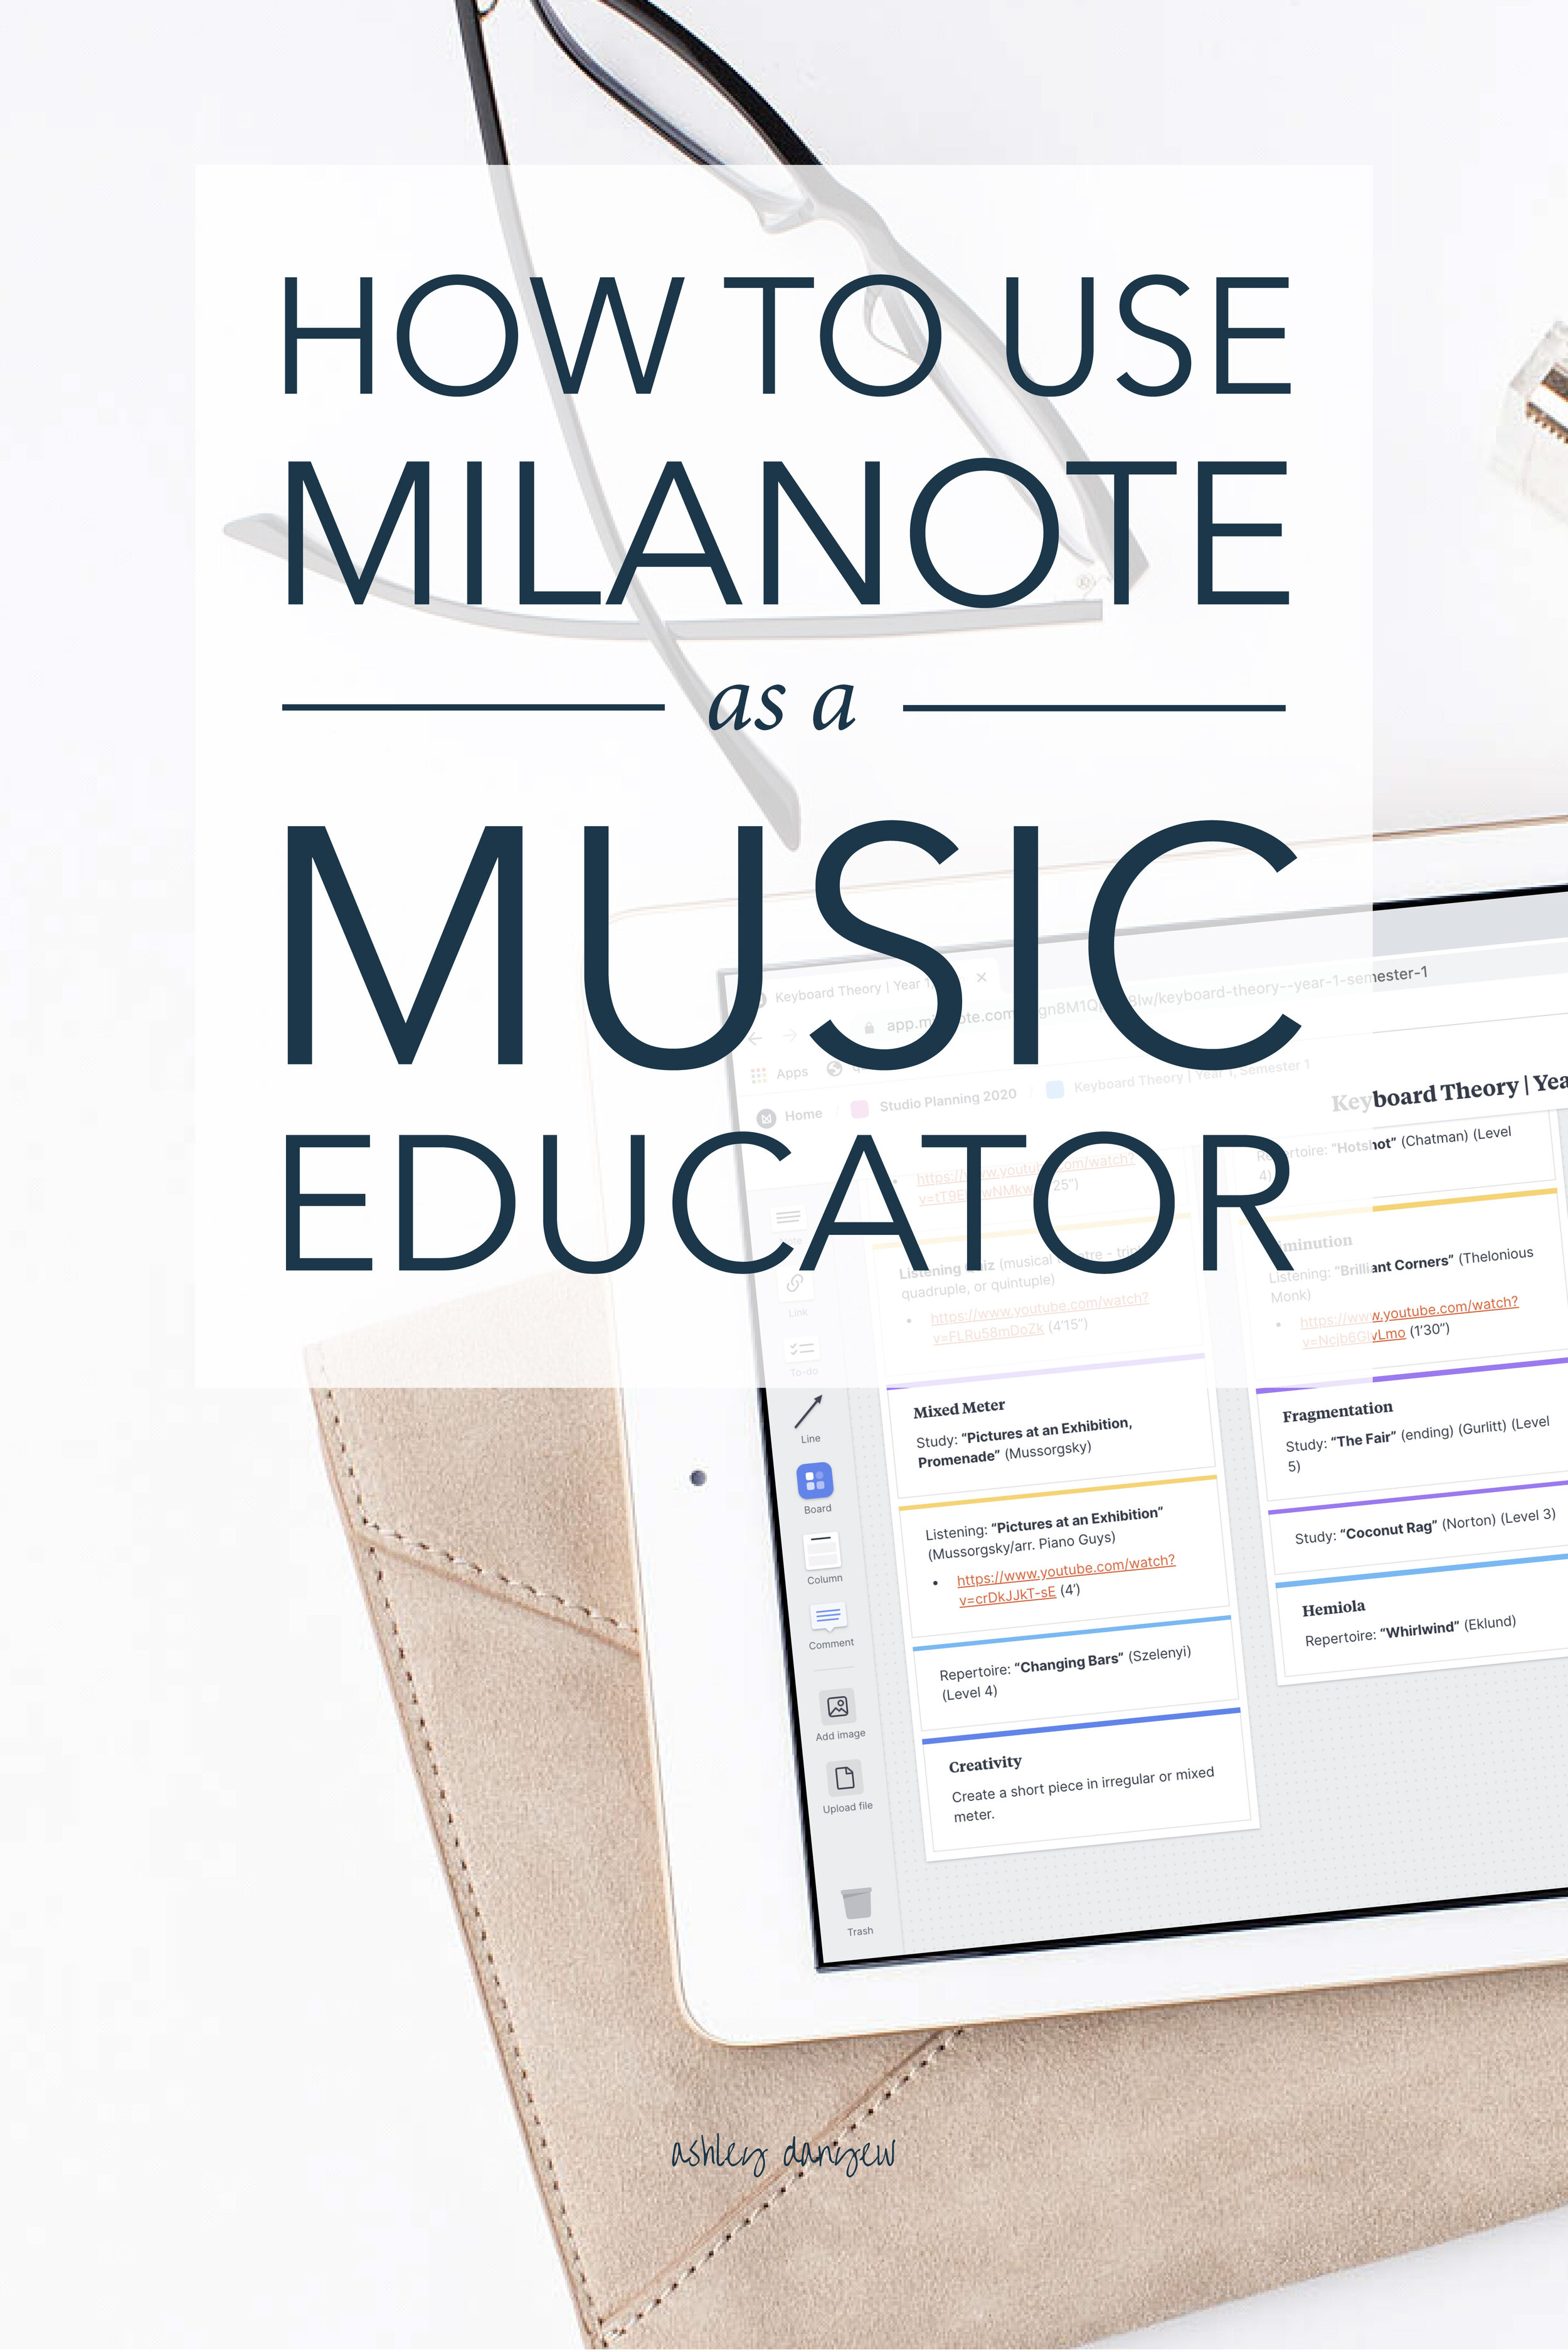 How to Use Milanote as a Music Educator